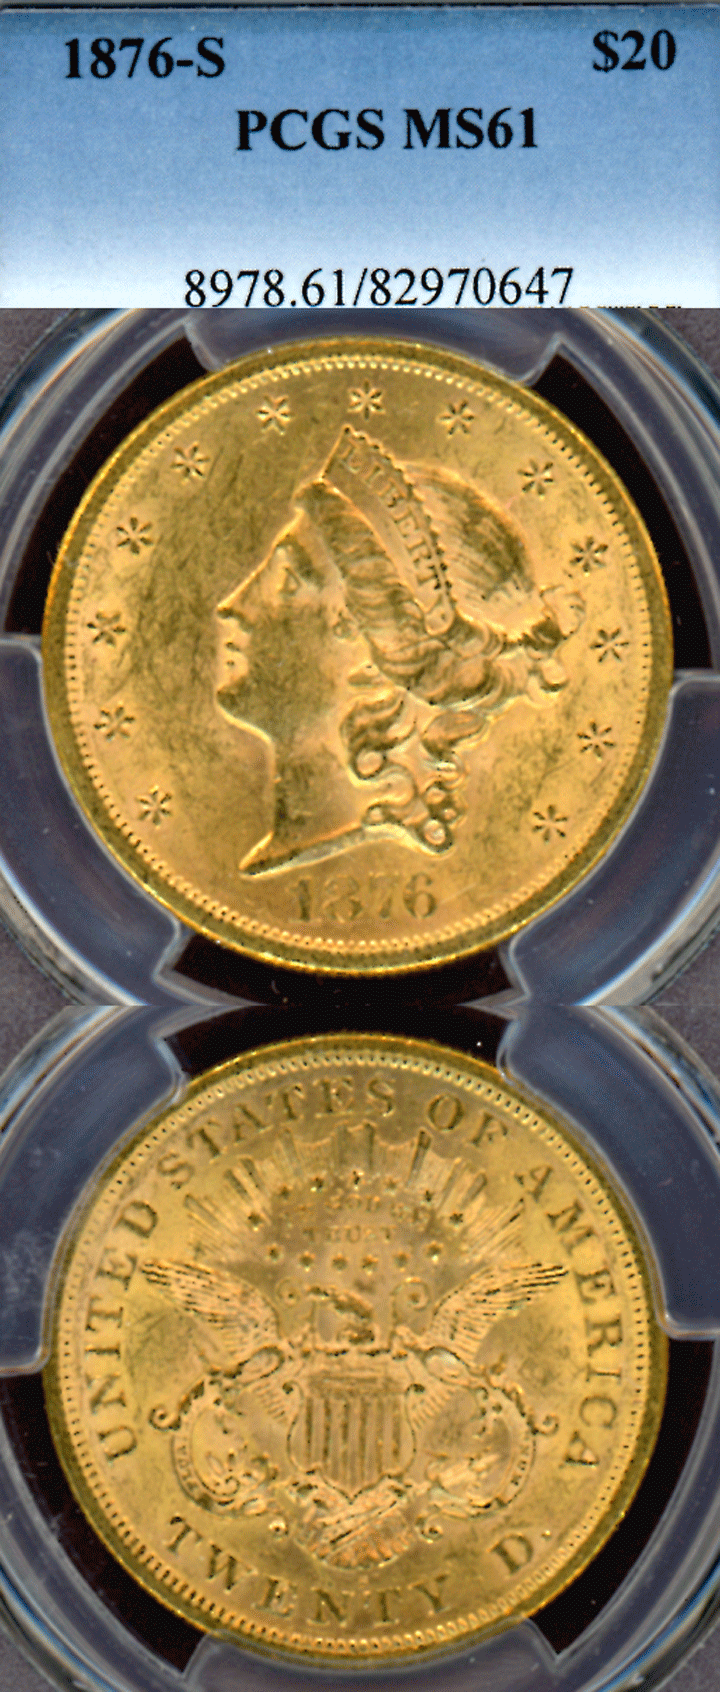 1876-S $20.00 Type-2 UD double eagle